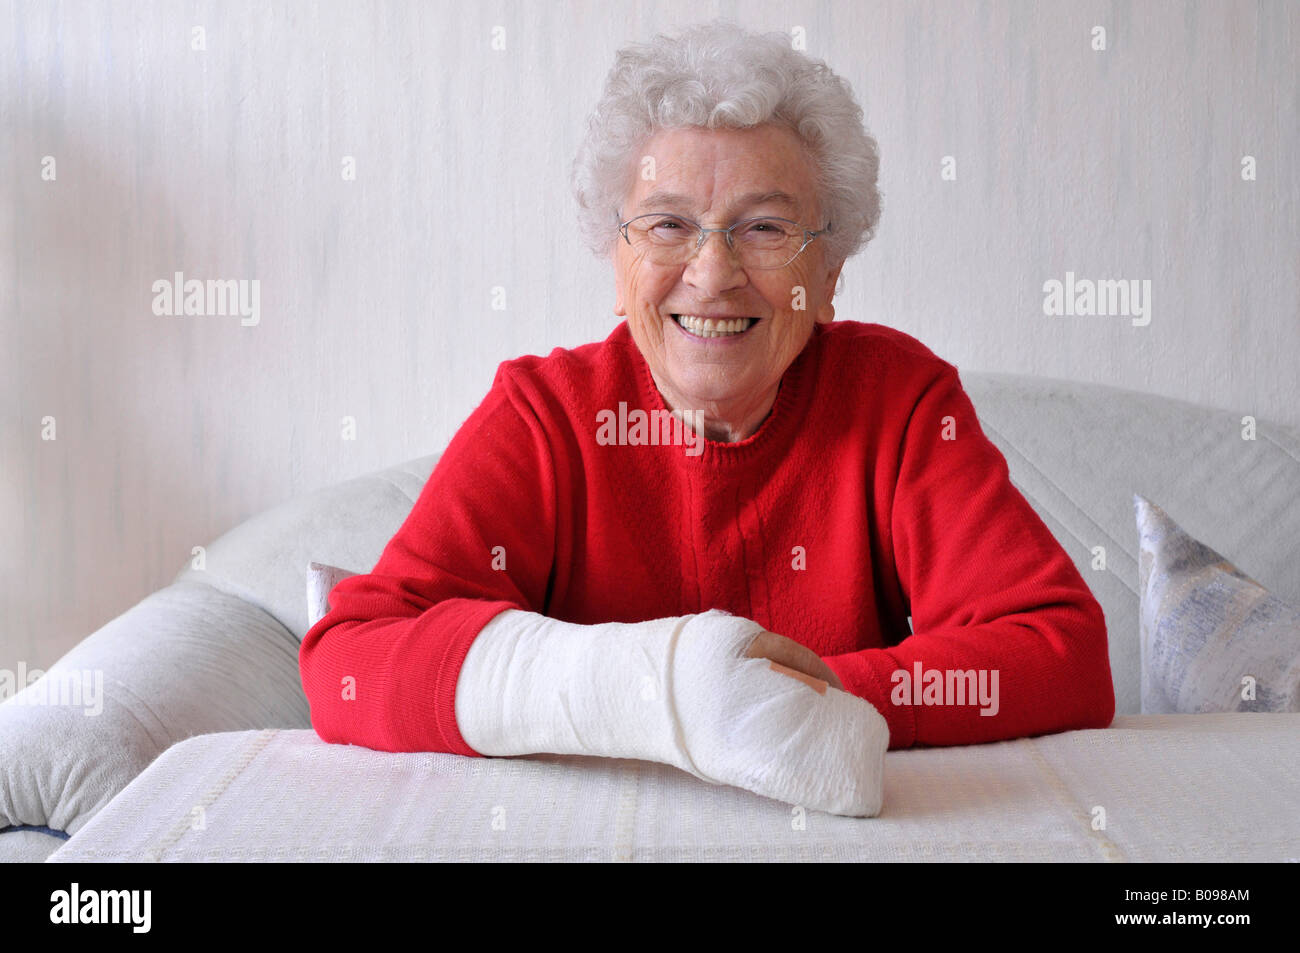 Senior woman, her right hand in a cast Stock Photo